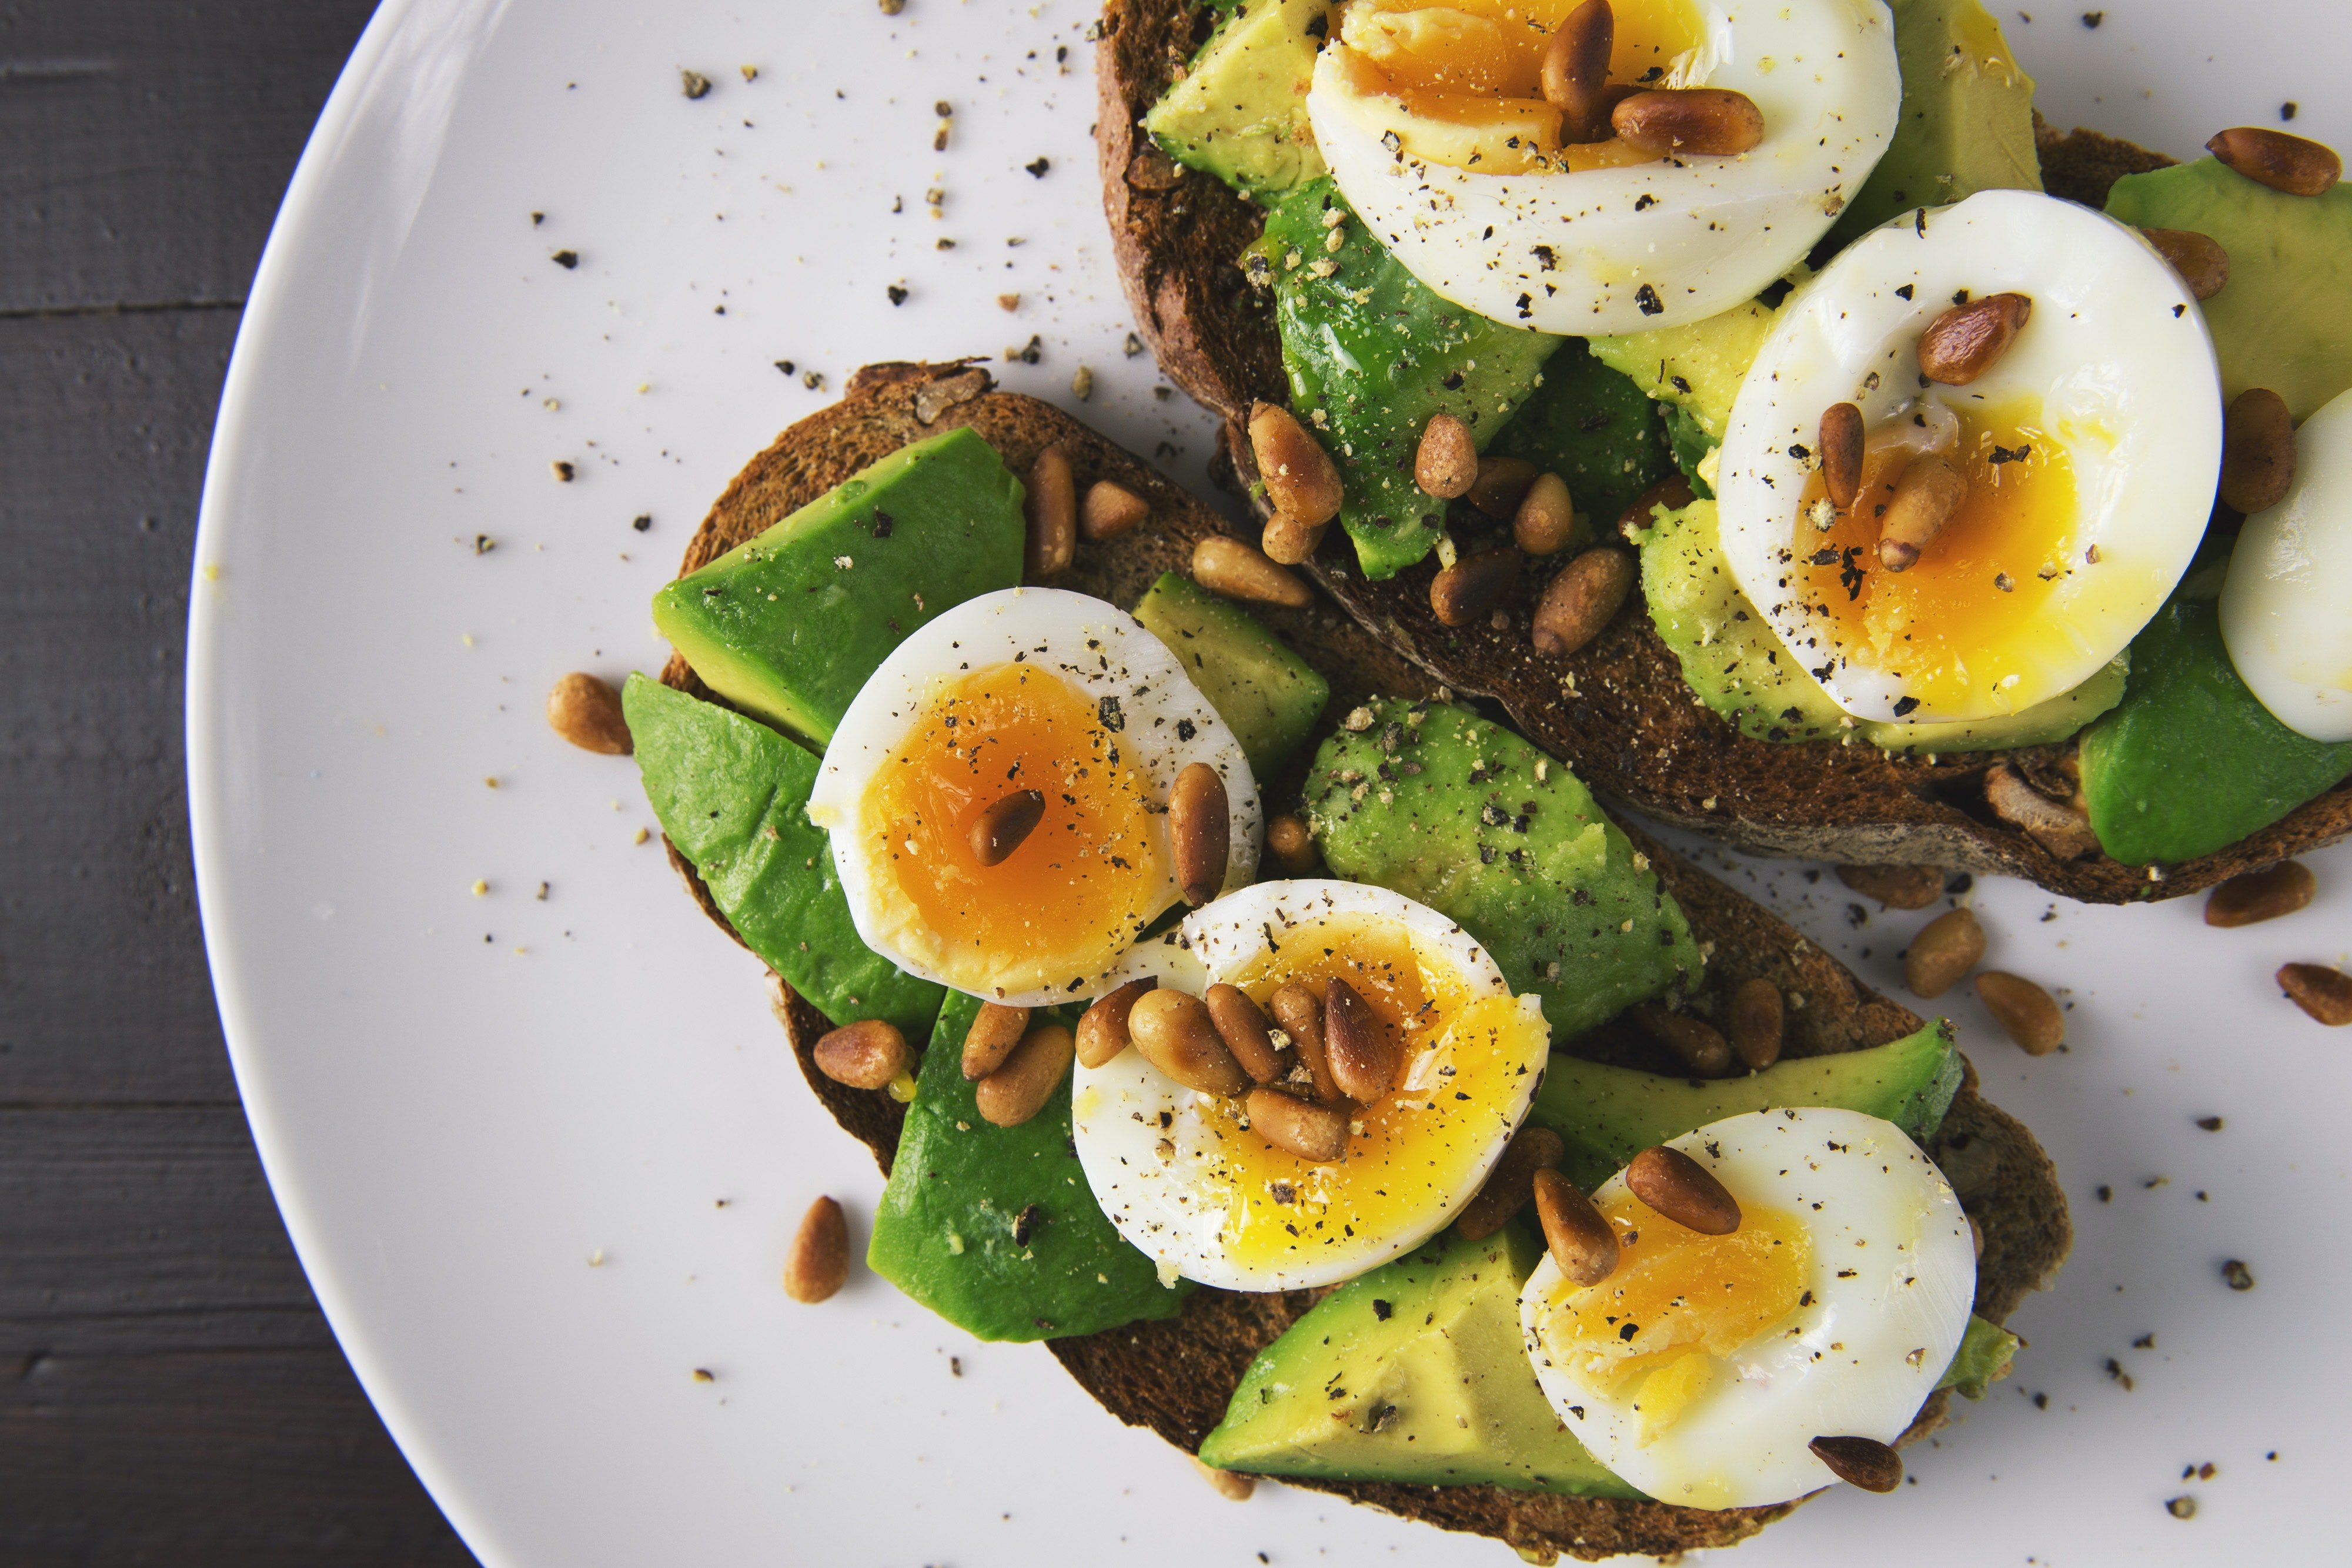 Avocado toast. (Photo by Foodie Factor from Pexels)